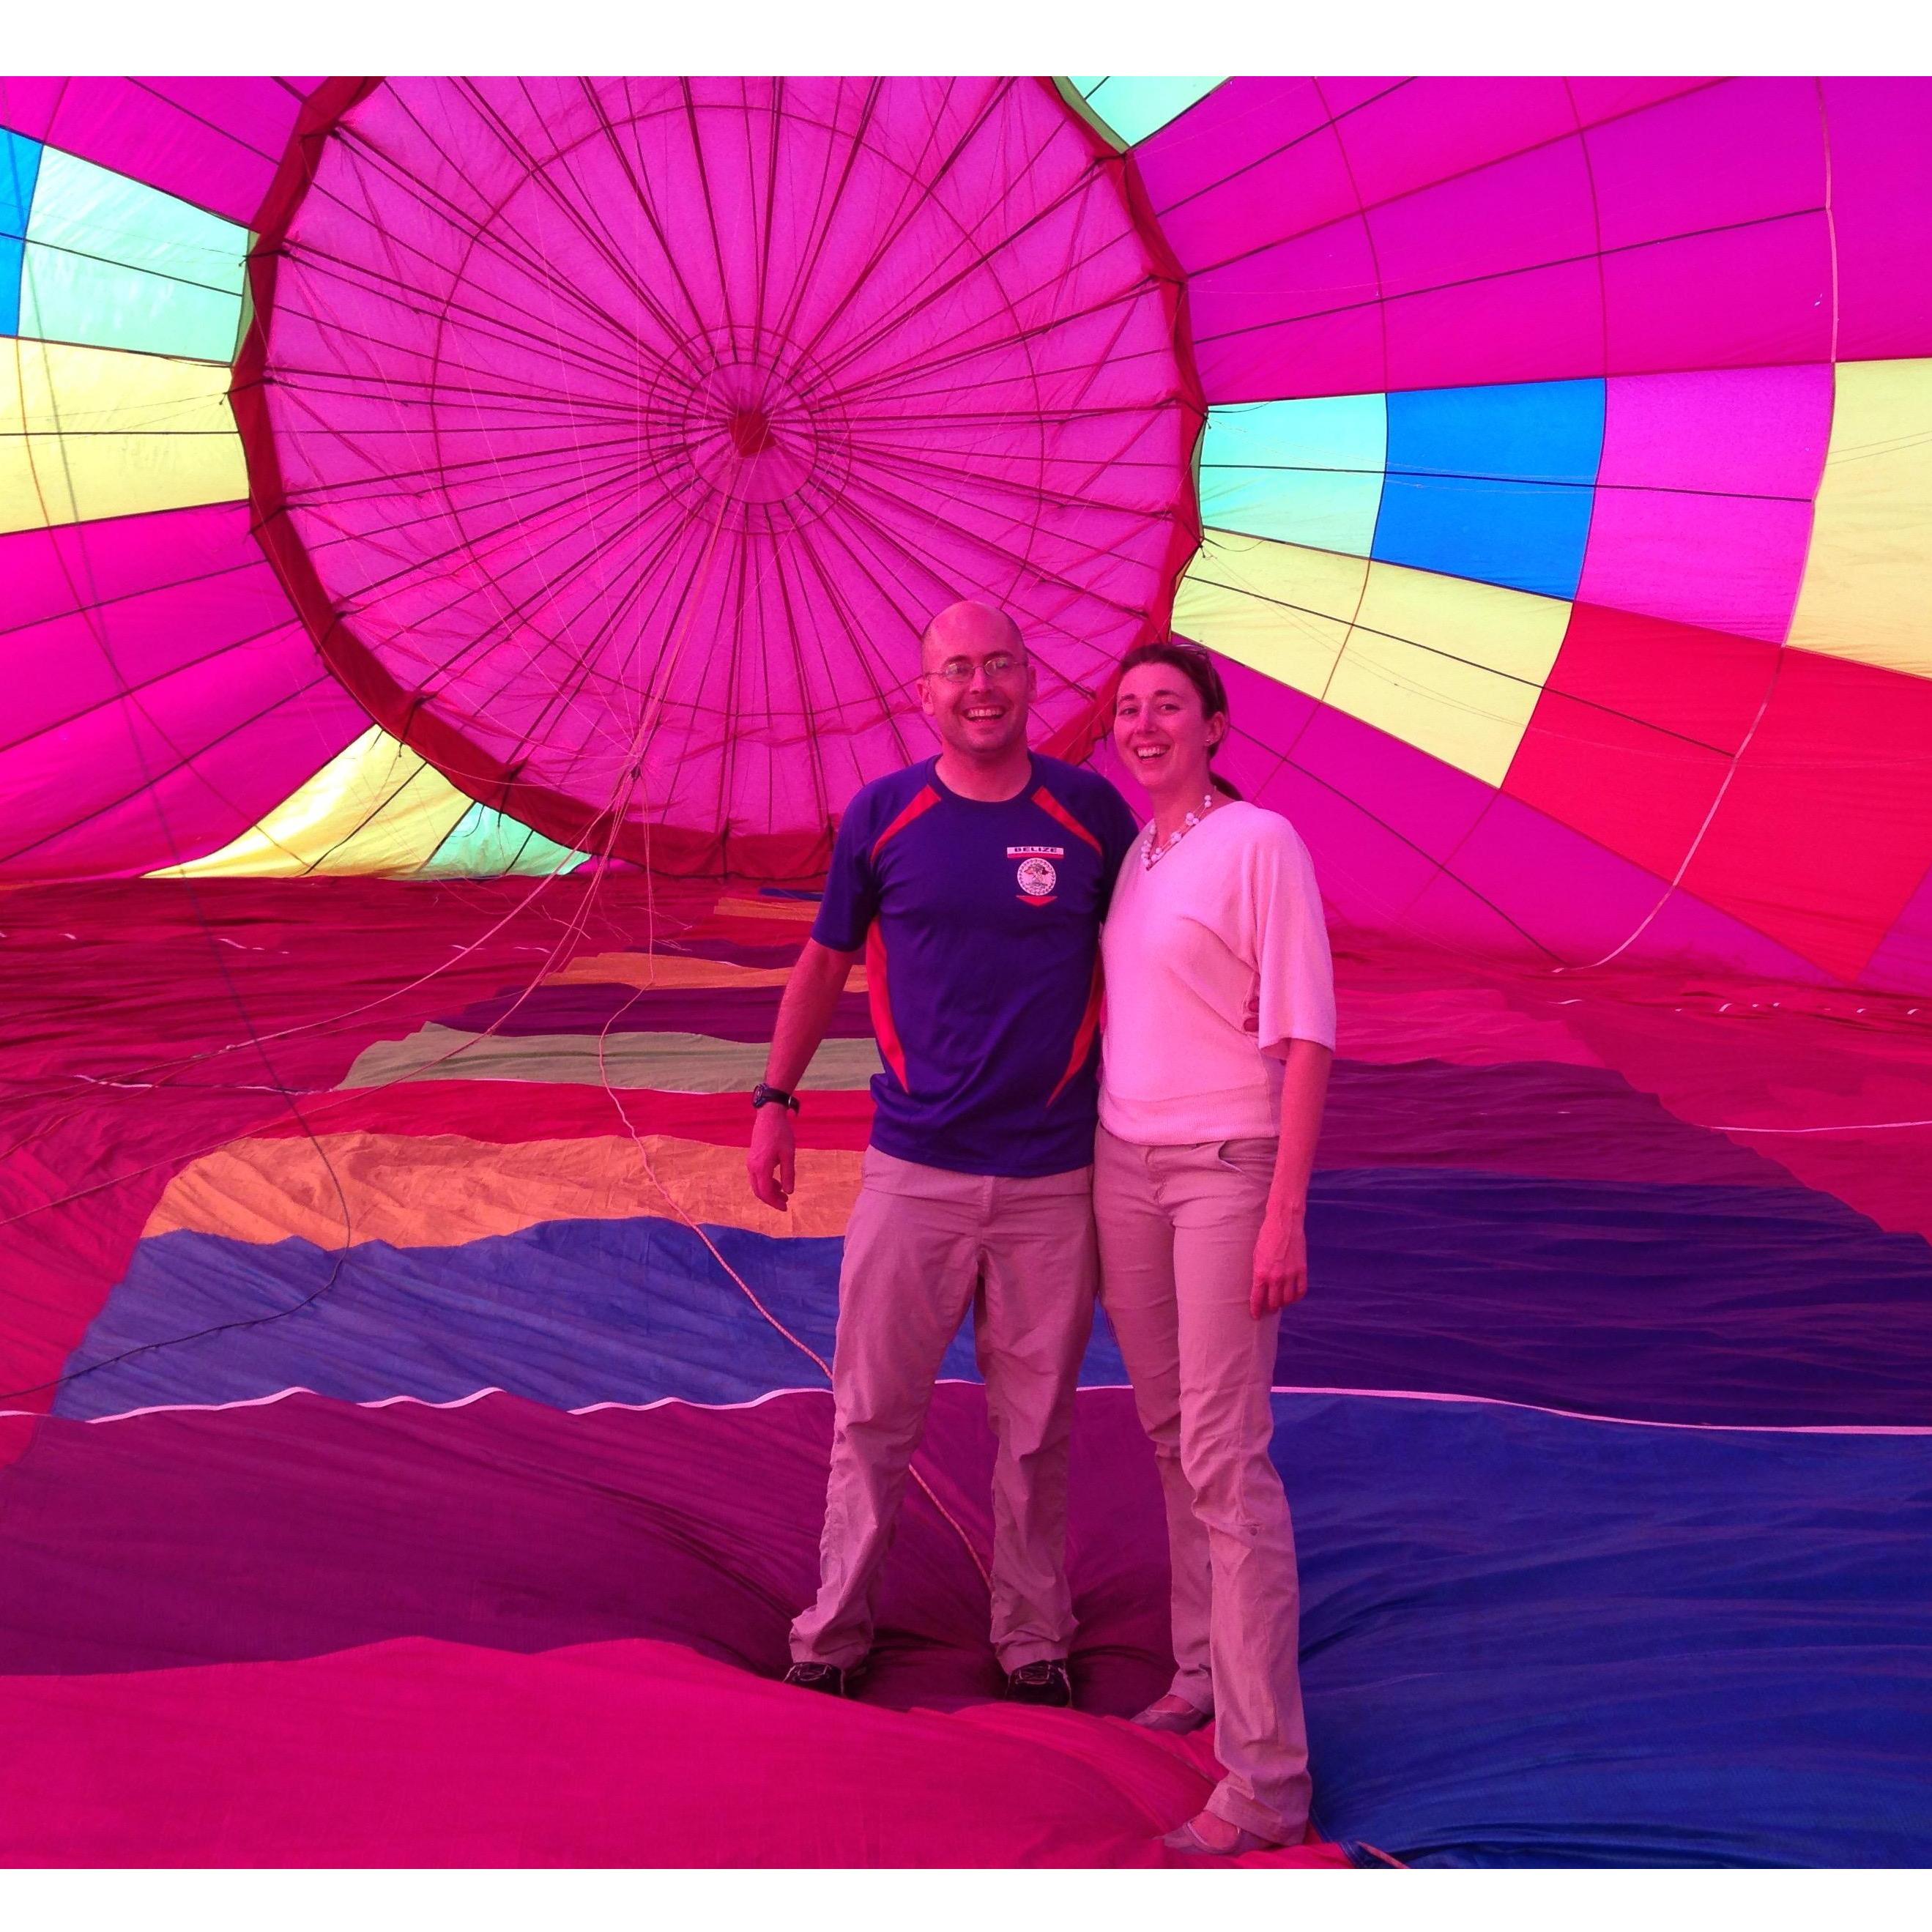 In August 2015 we crossed taking a hot air balloon ride off our bucket list!